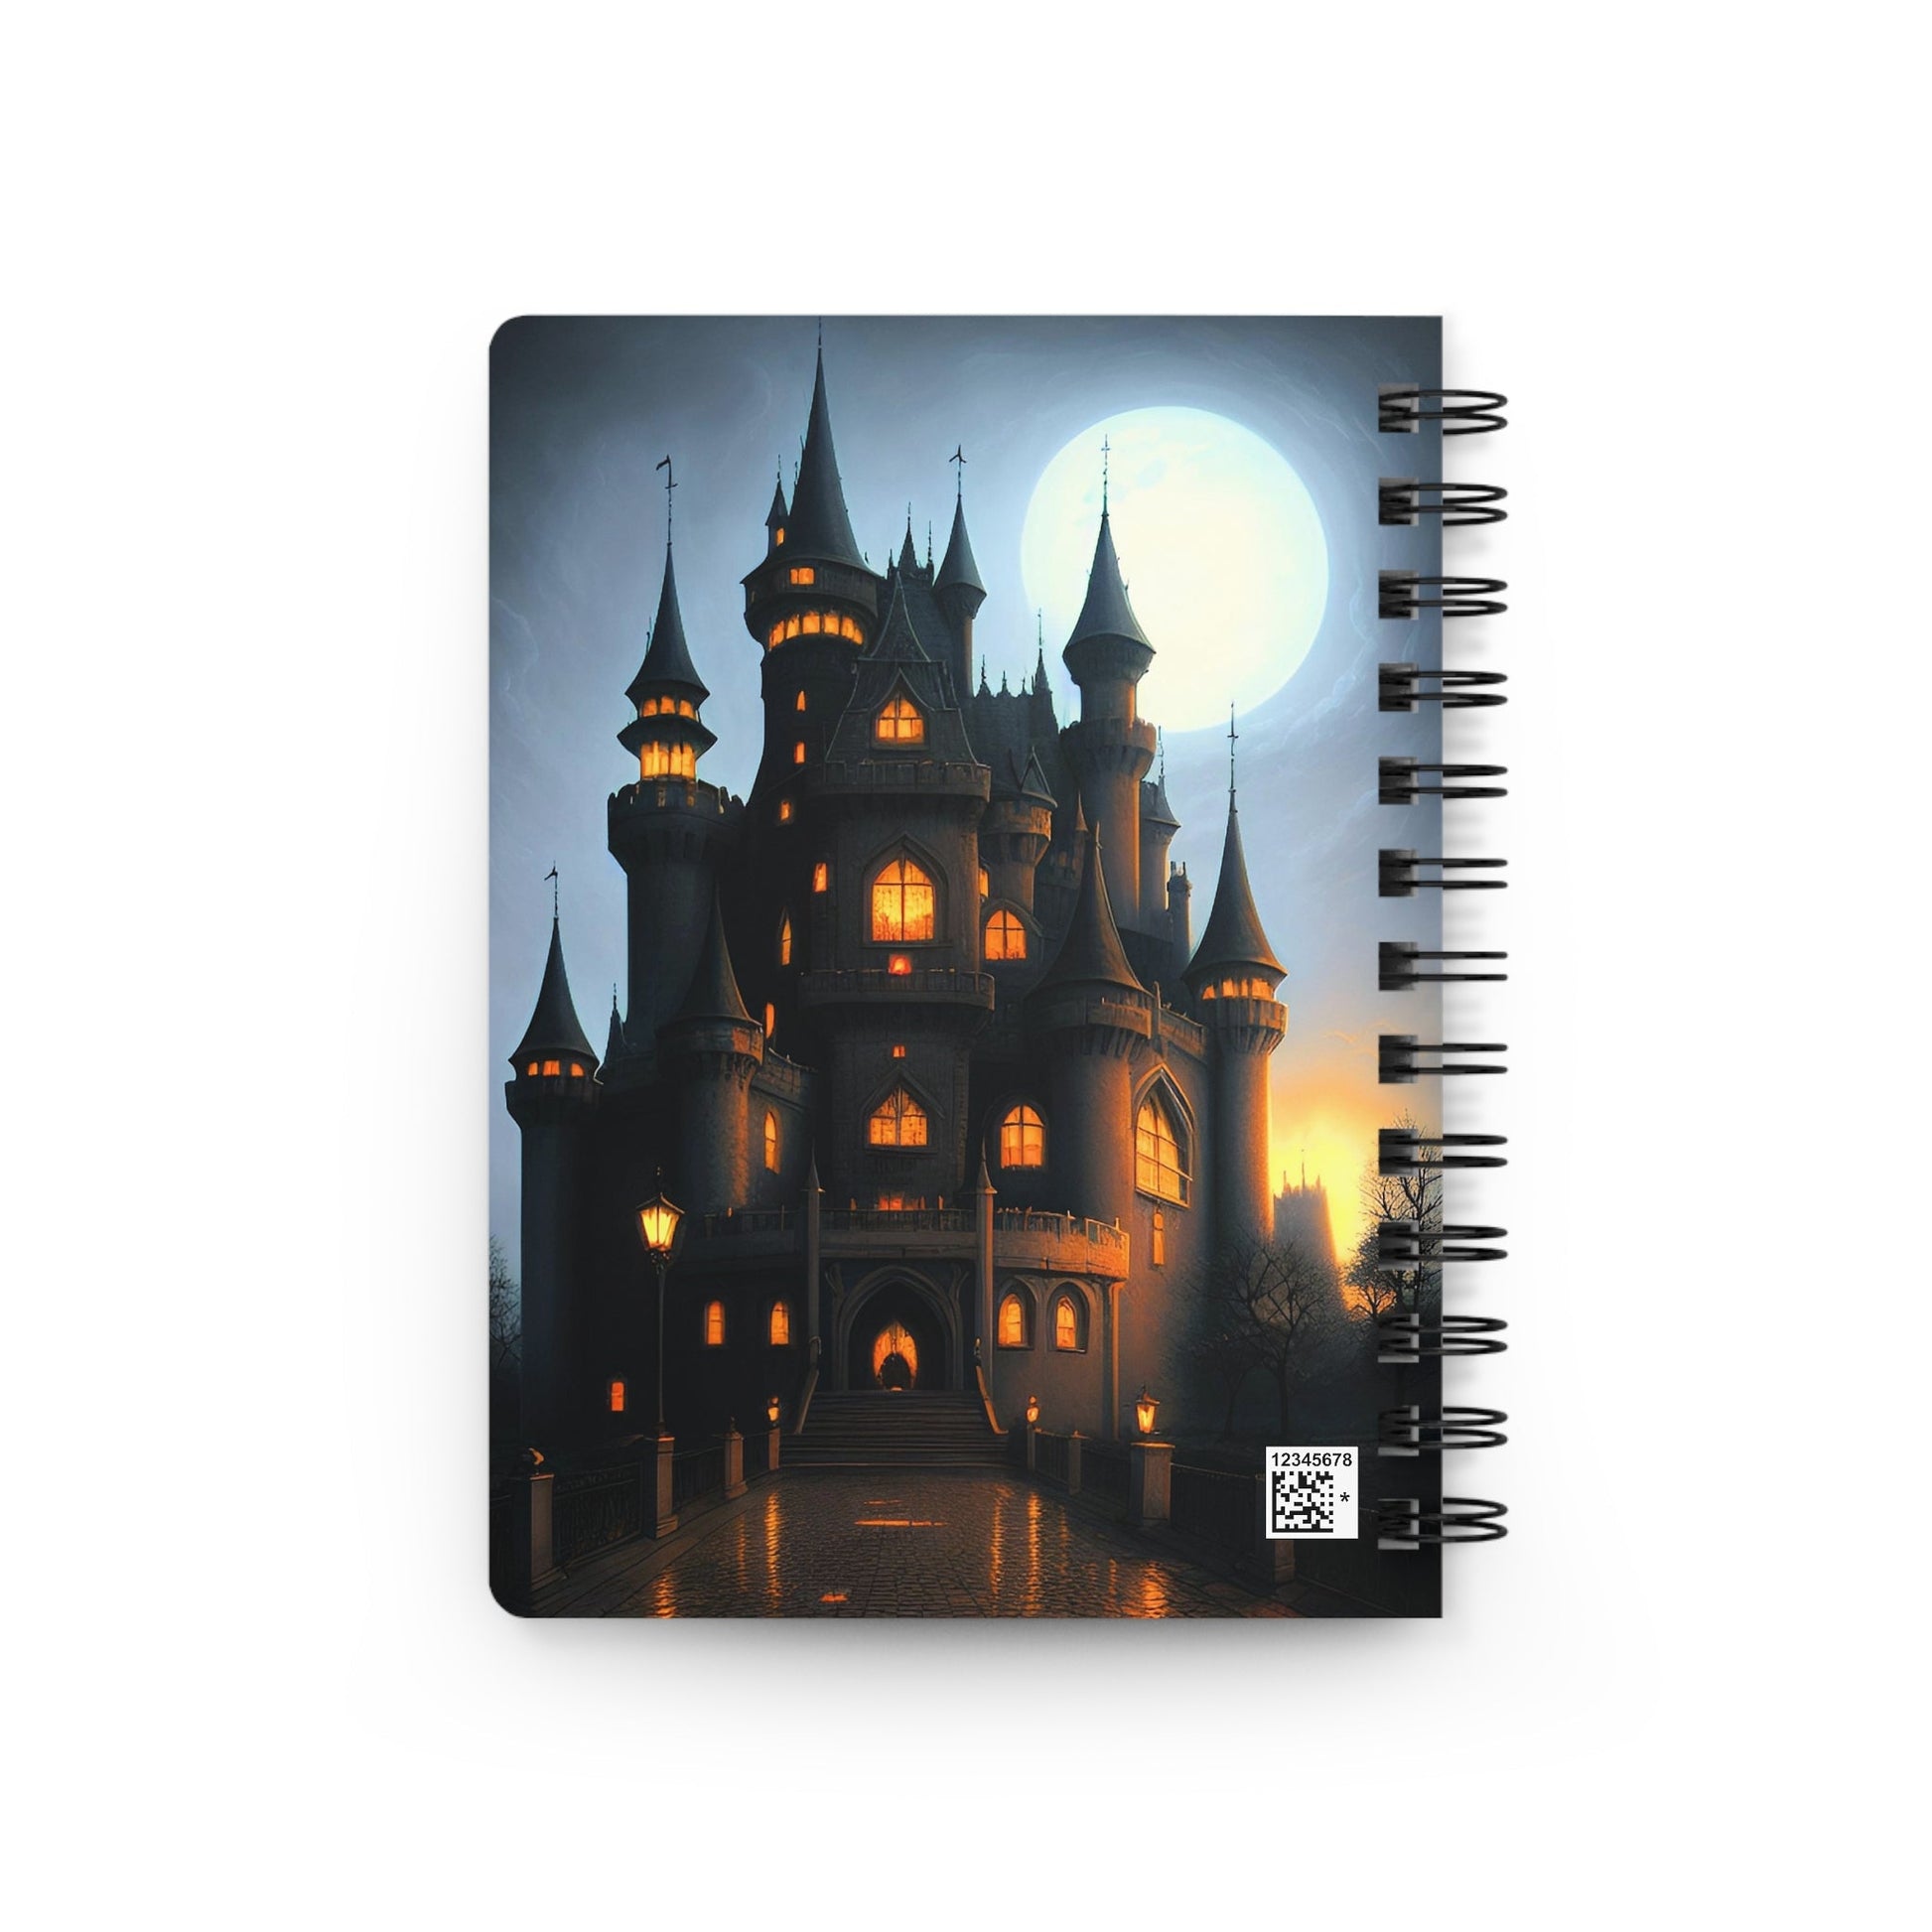 CrazyYetiClothing, CYC, Full Moon Castle (Spiral Bound Journal), Paper products